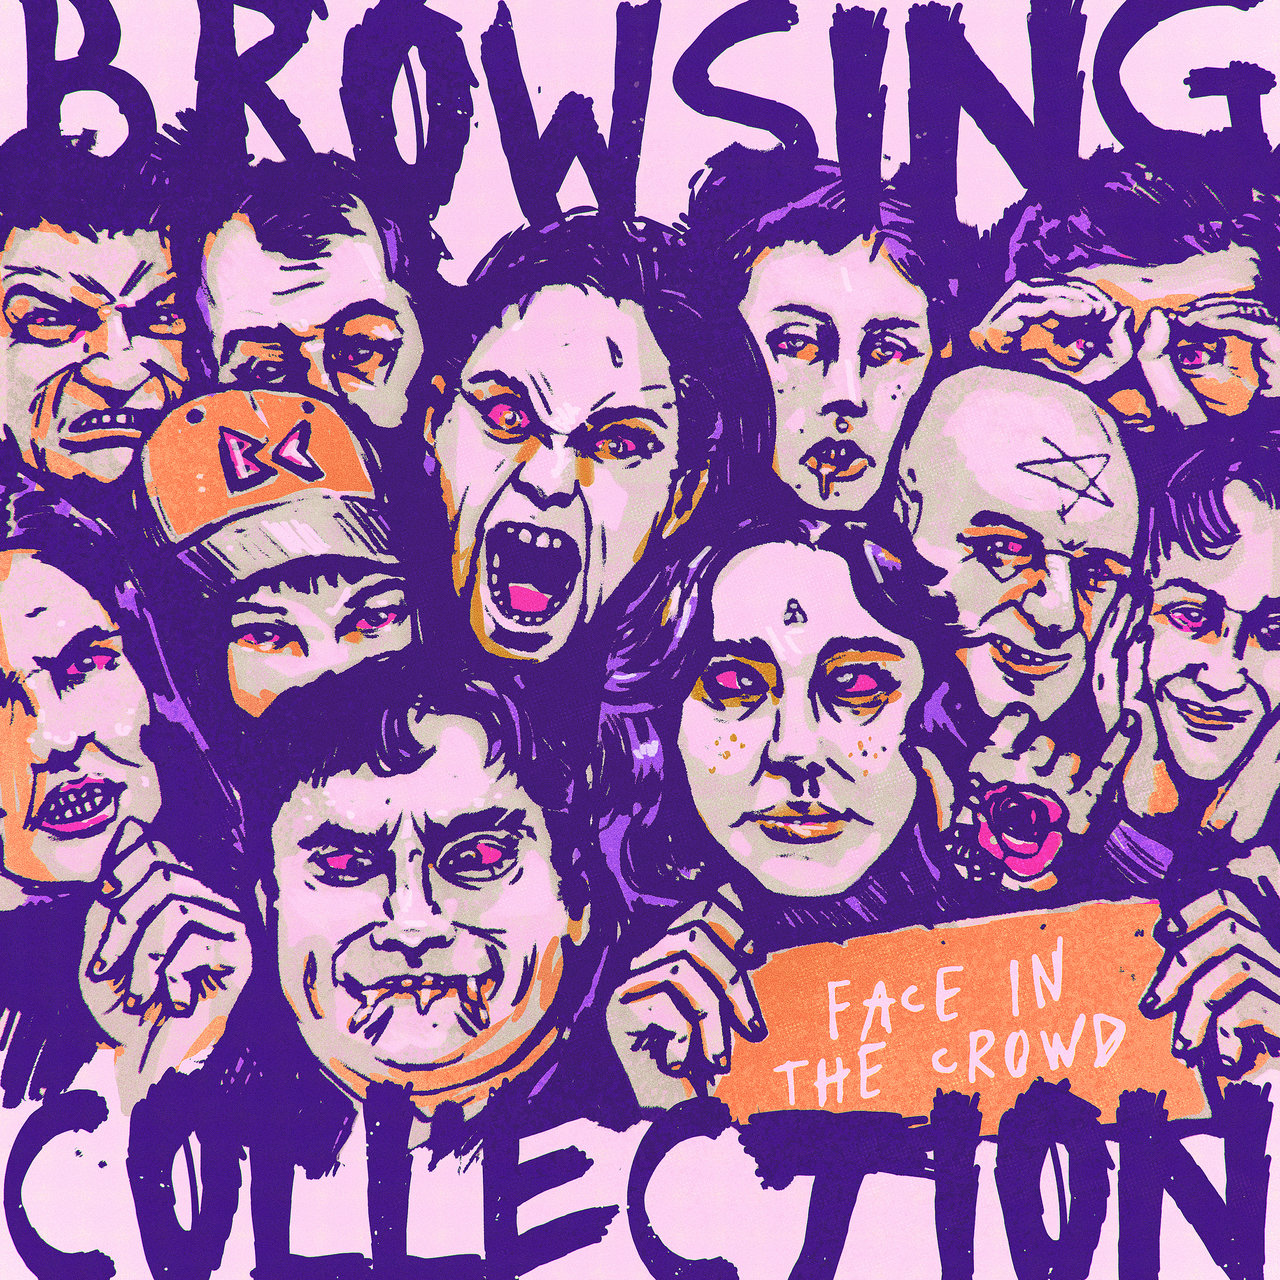 Browsing Collection — Face in the Crowd cover artwork